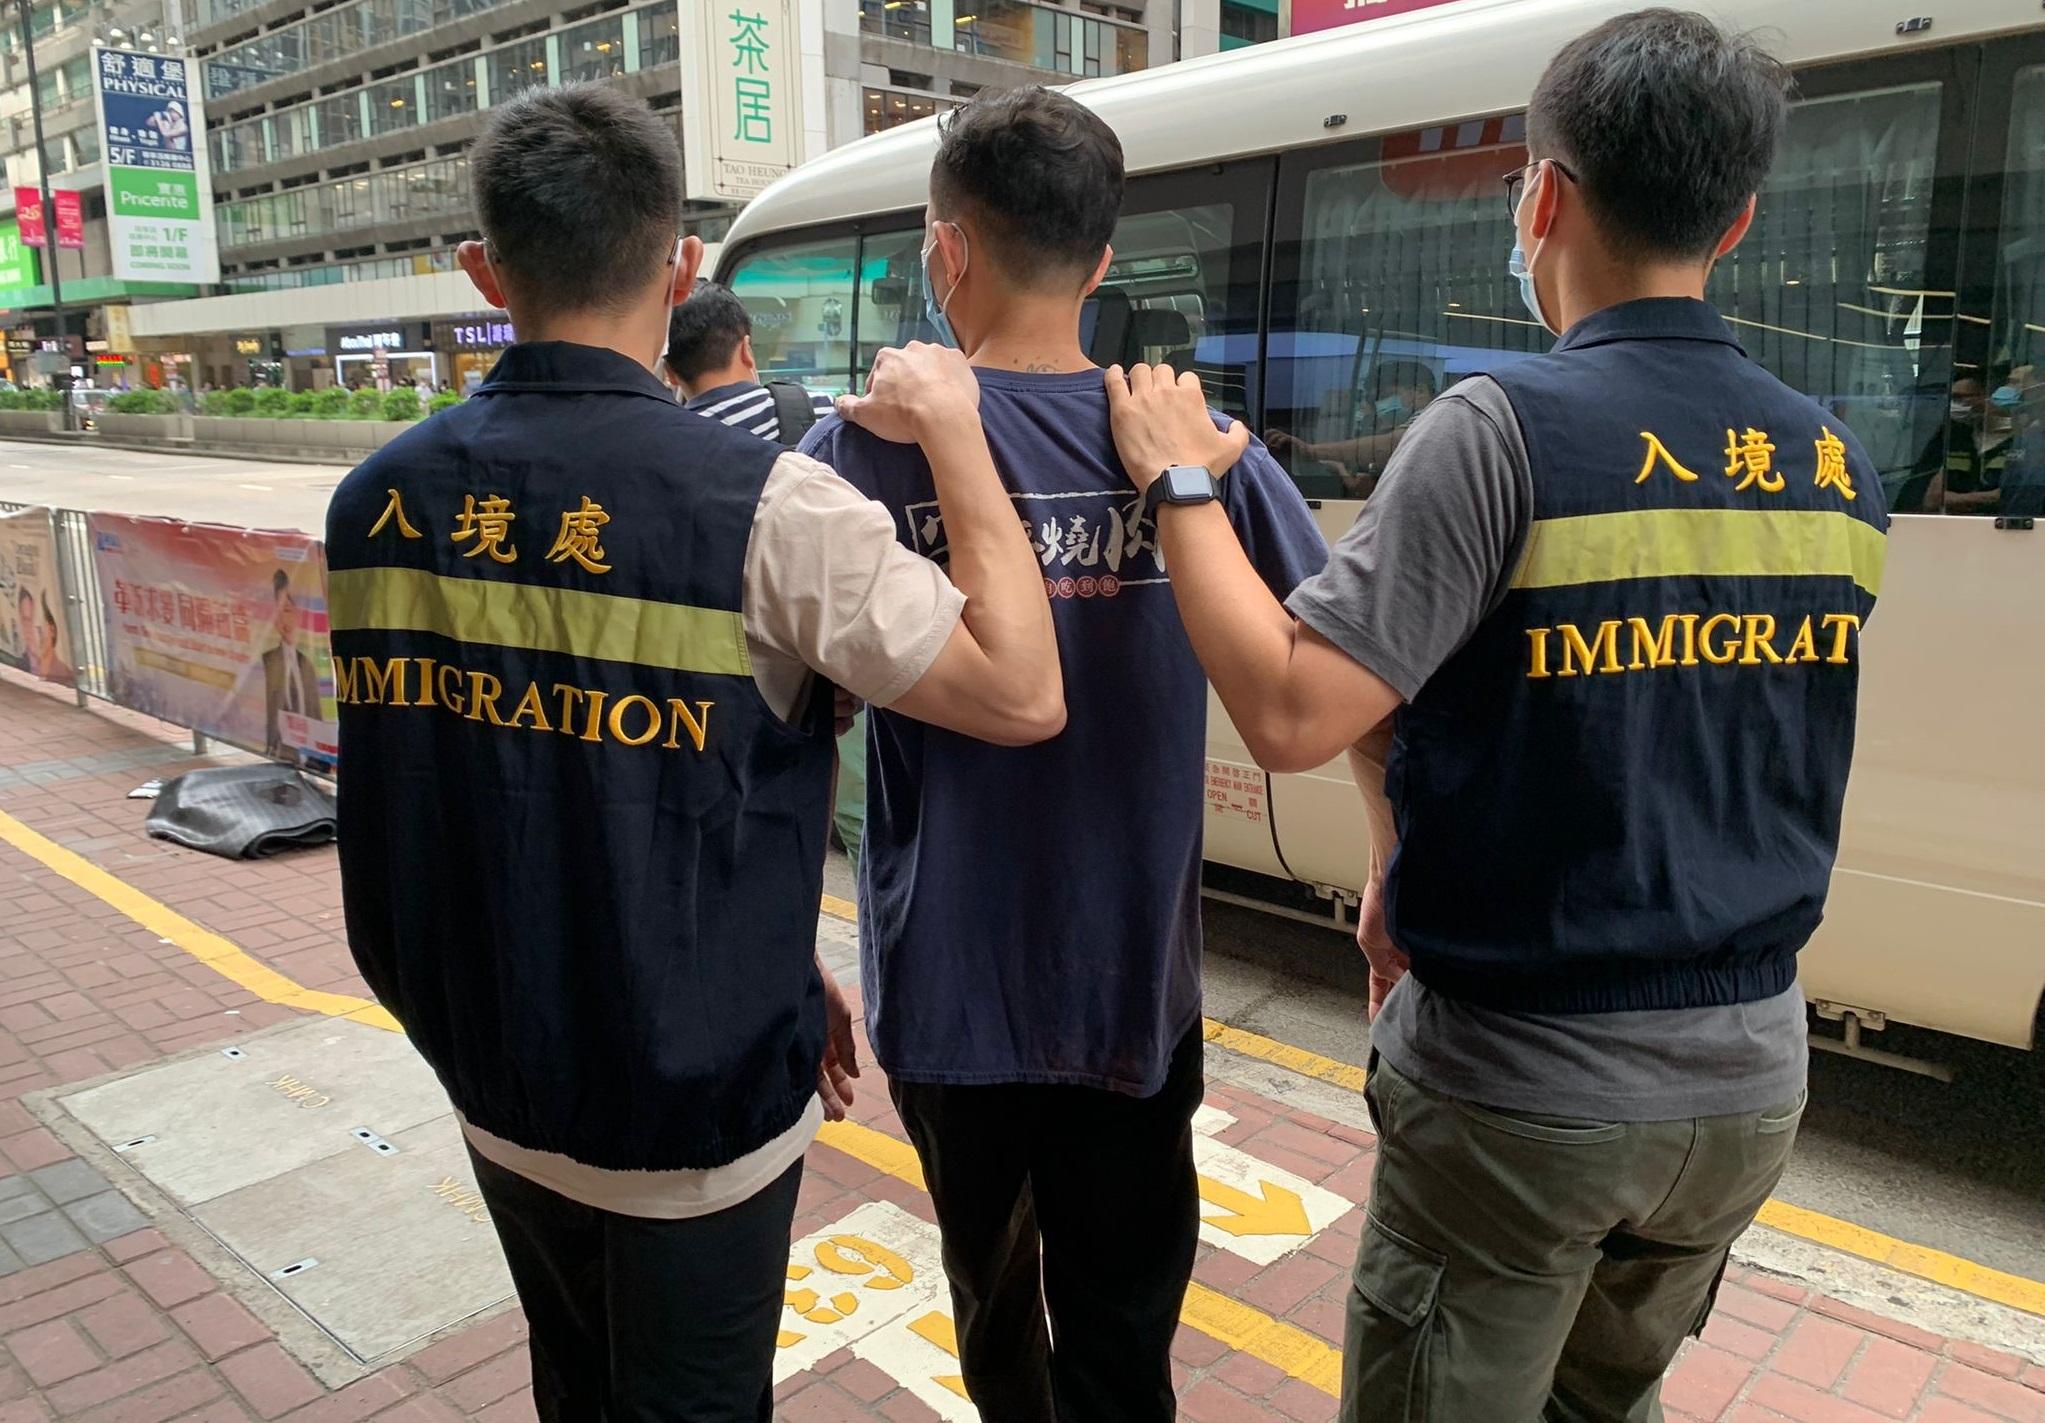 The Immigration Department mounted a series of territory-wide anti-illegal worker operations codenamed "Lightshadow" and "Twilight" for four consecutive days from June 20 to yesterday (June 23). Photo shows a suspected illegal worker arrested during an operation.